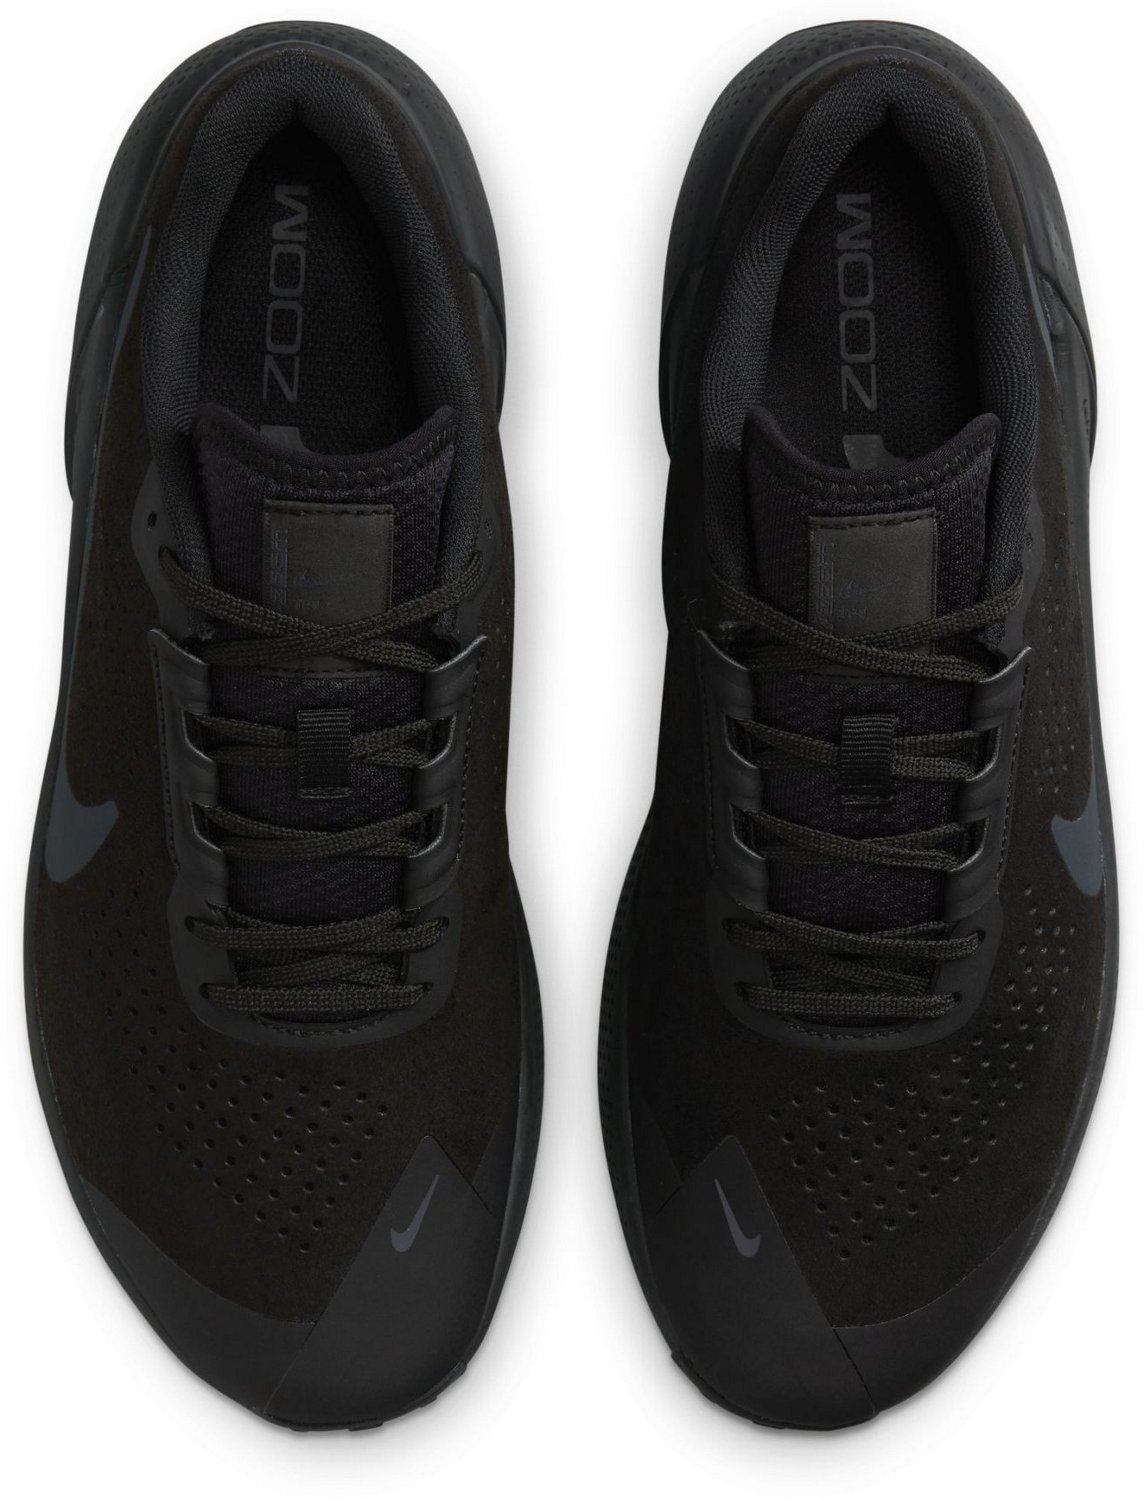 Nike Air Zoom TR 1 Men's Workout Shoes.